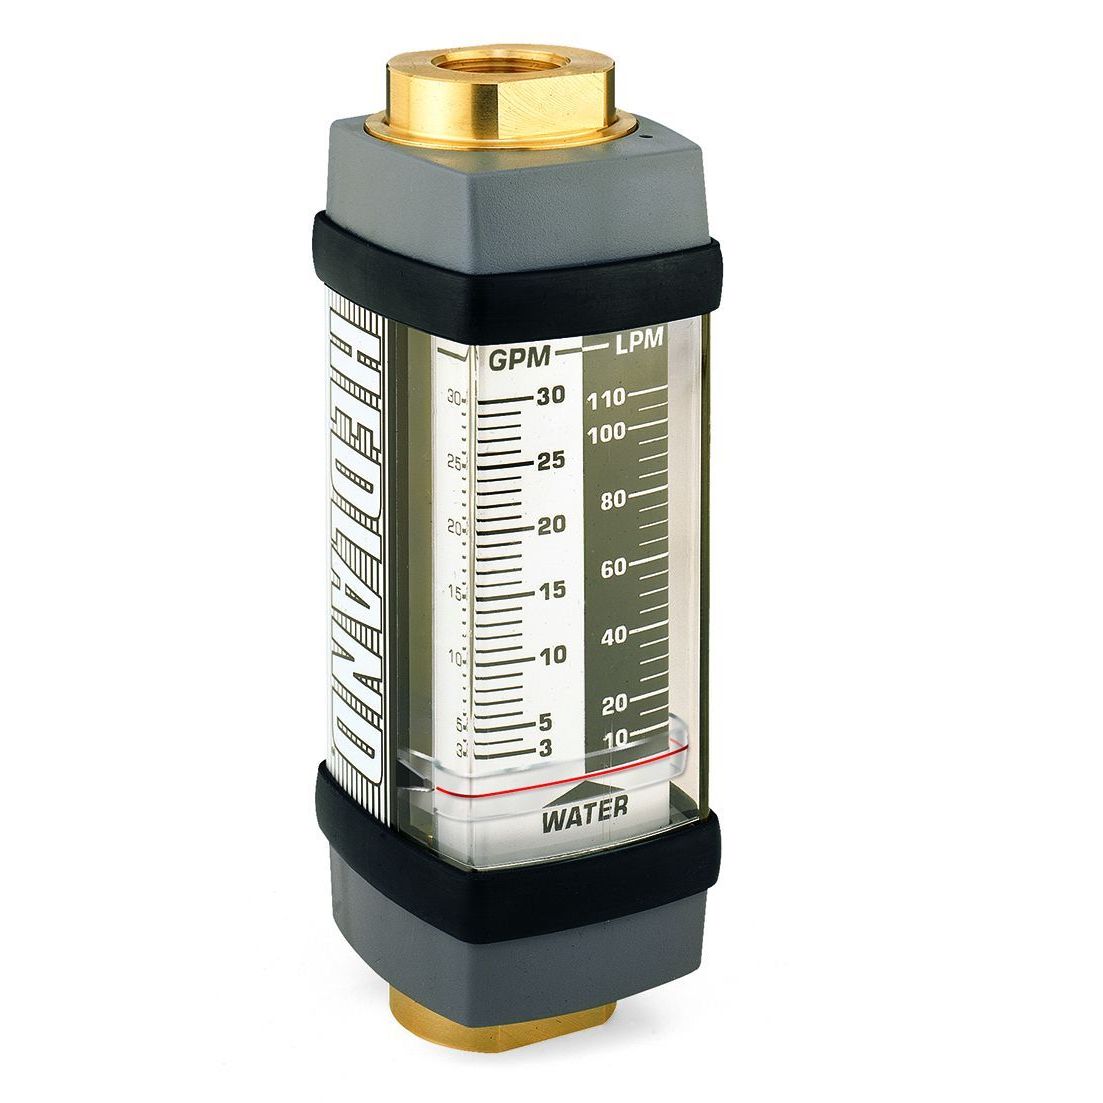 H855B-100 : Hedland 3500psi Brass Flow Meter for Water, 1.25 NPT, 10 to 100 GPM